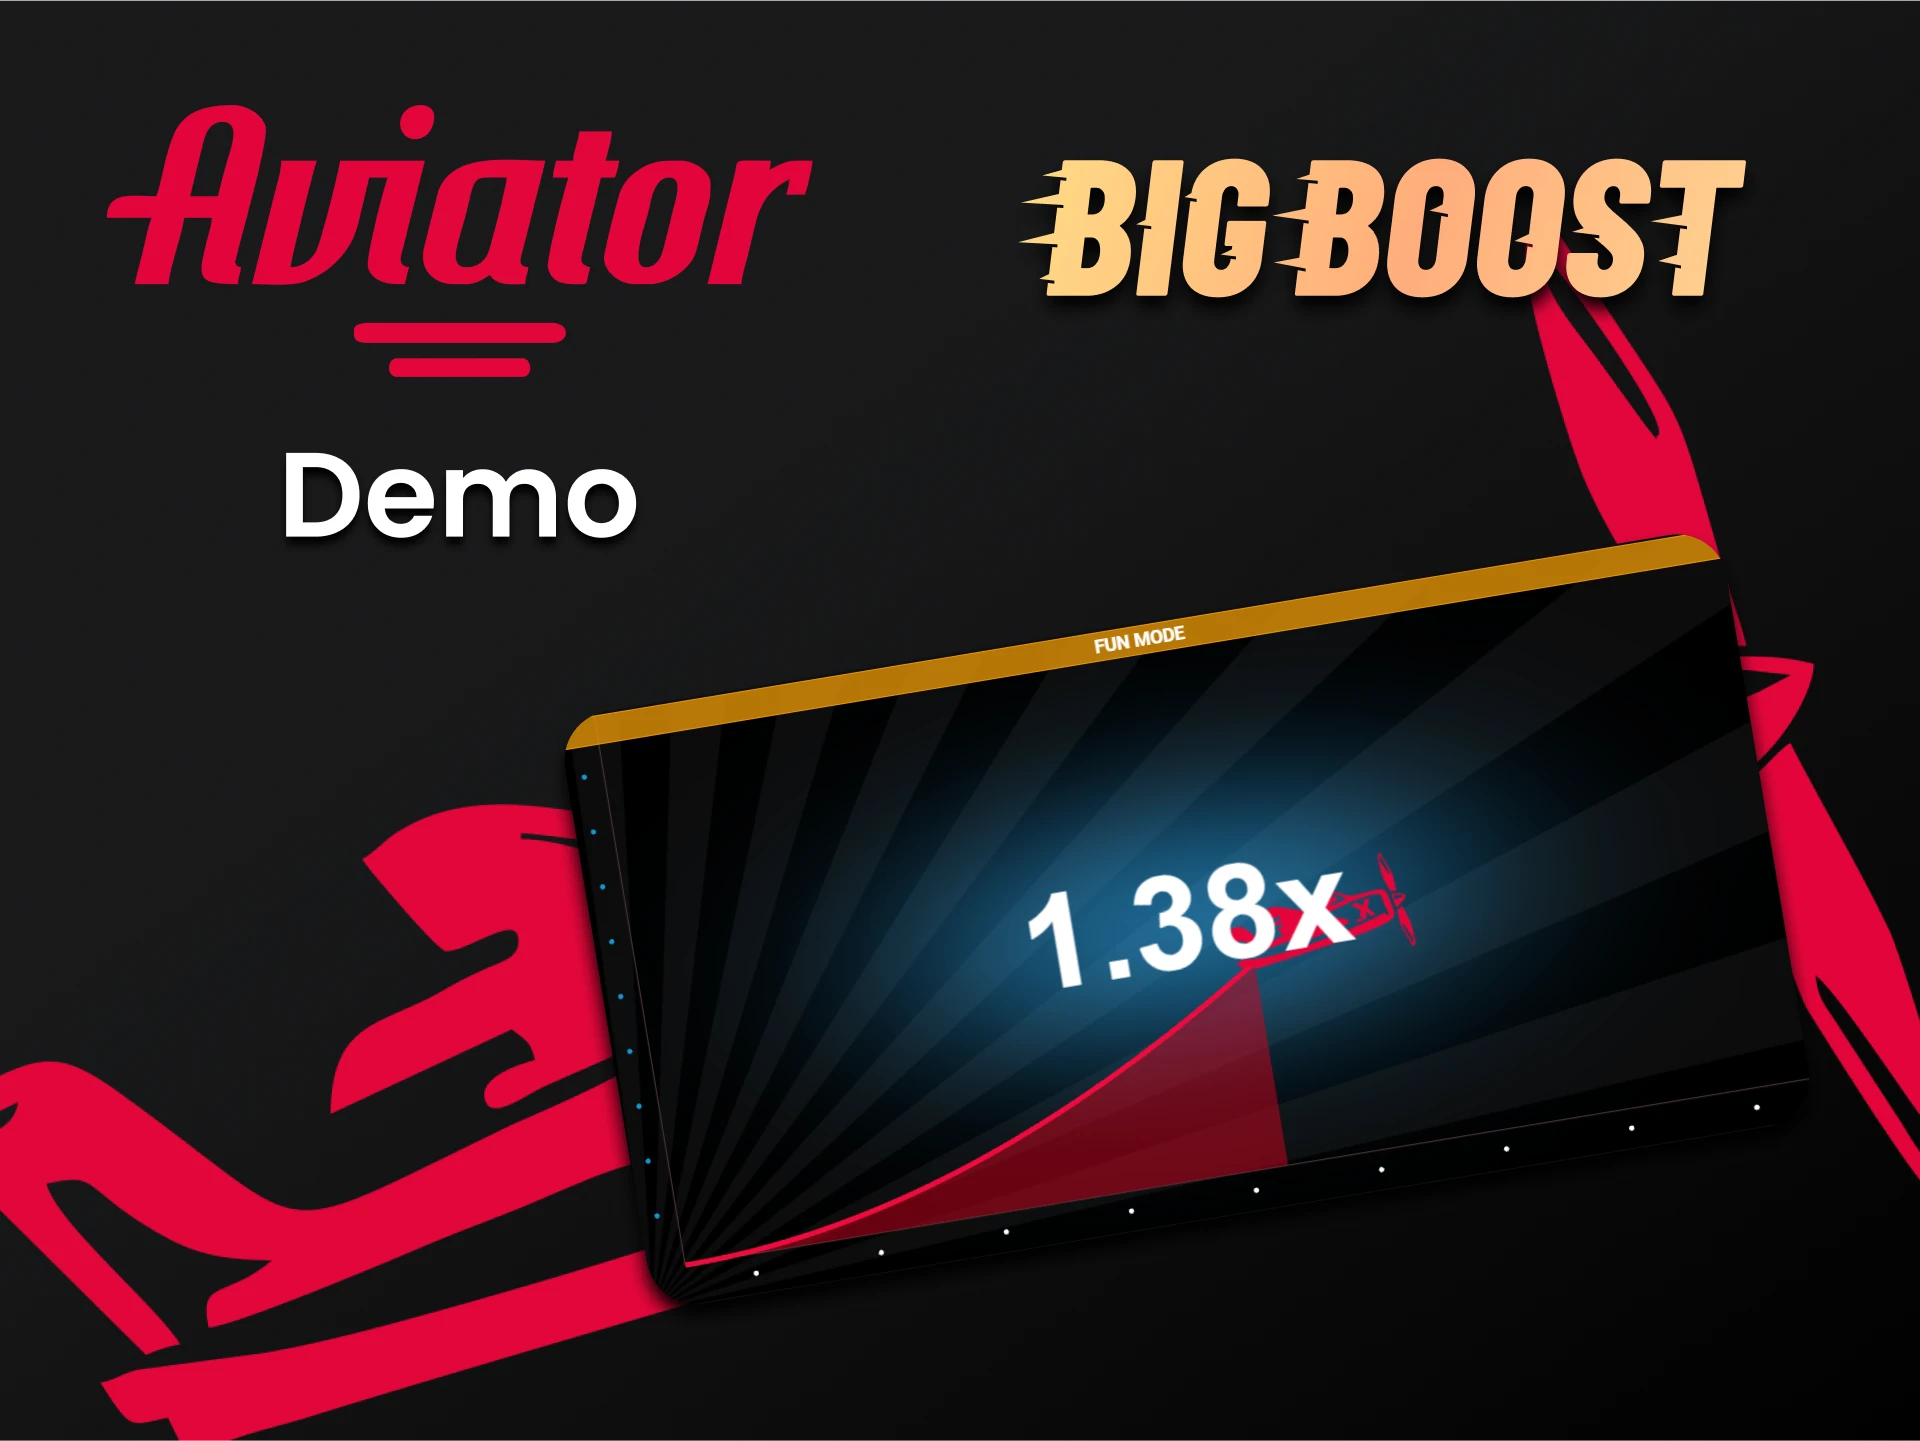 There is a demo version of Aviator on Big Boost.